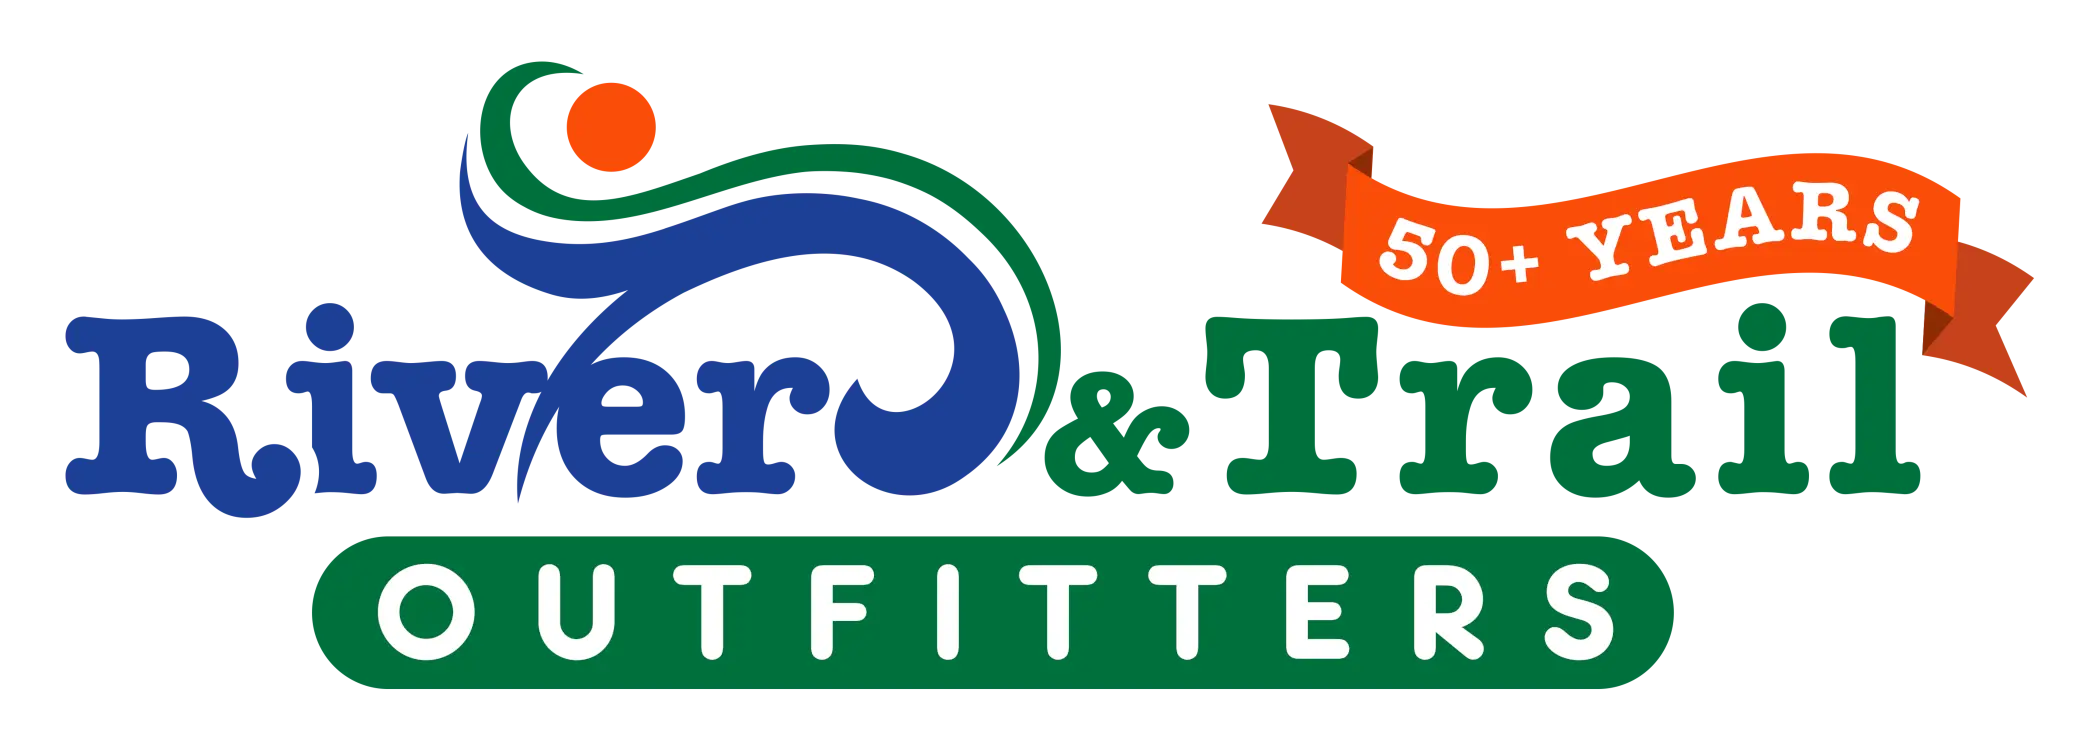 River & Trail Outfitters 50 years logo